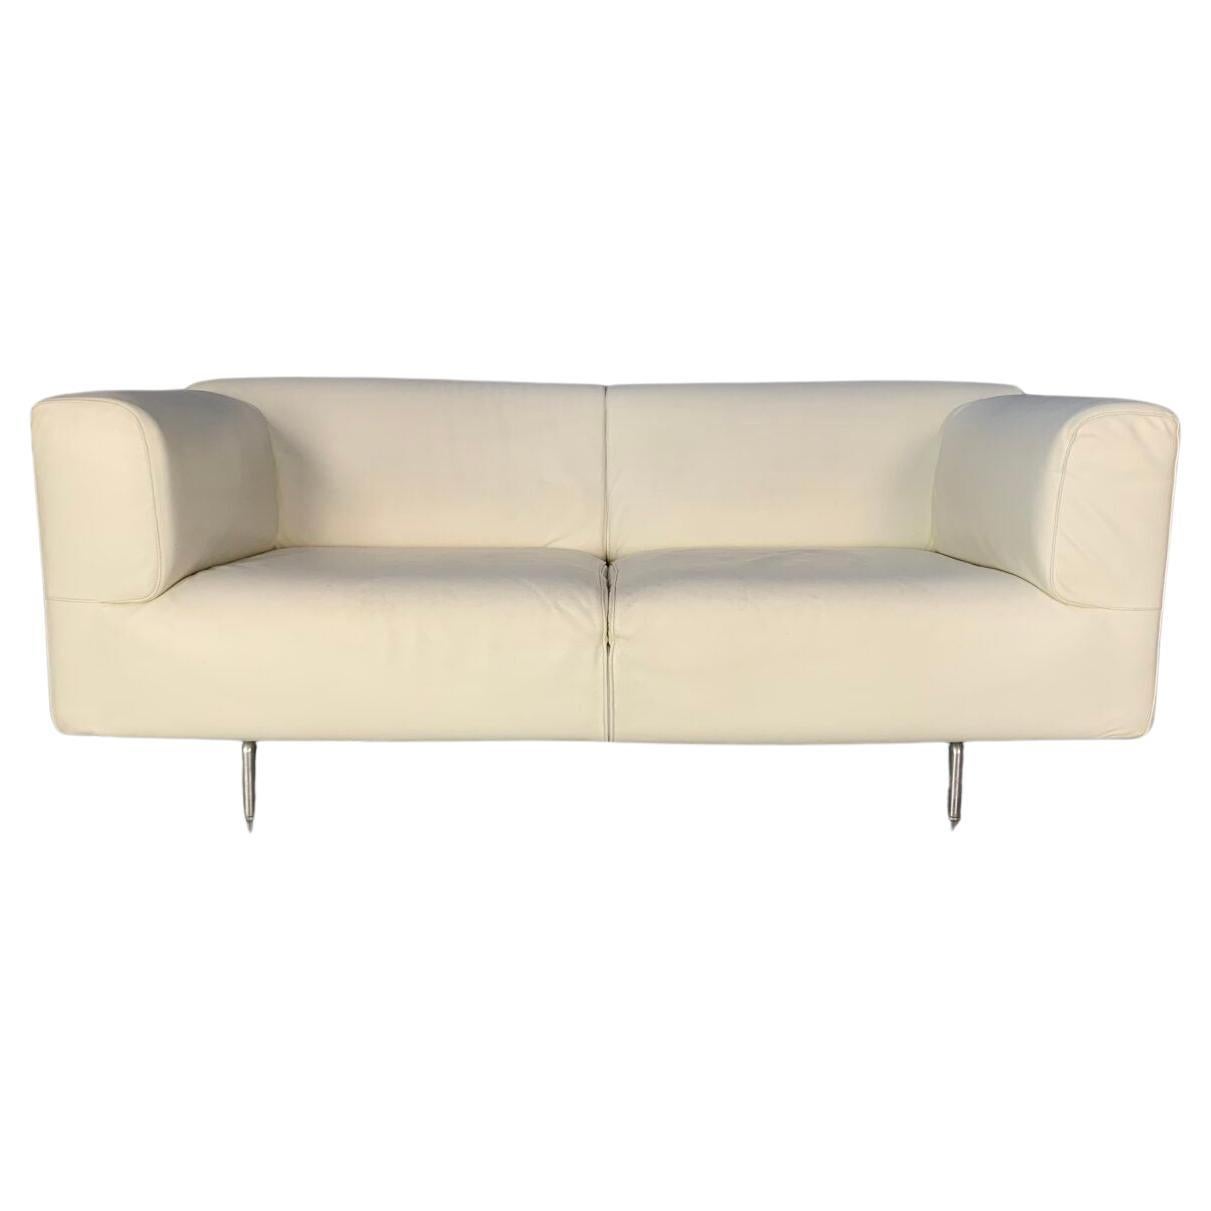 Cassina "250 Met" Large 2-Seat Sofa - In White Leather